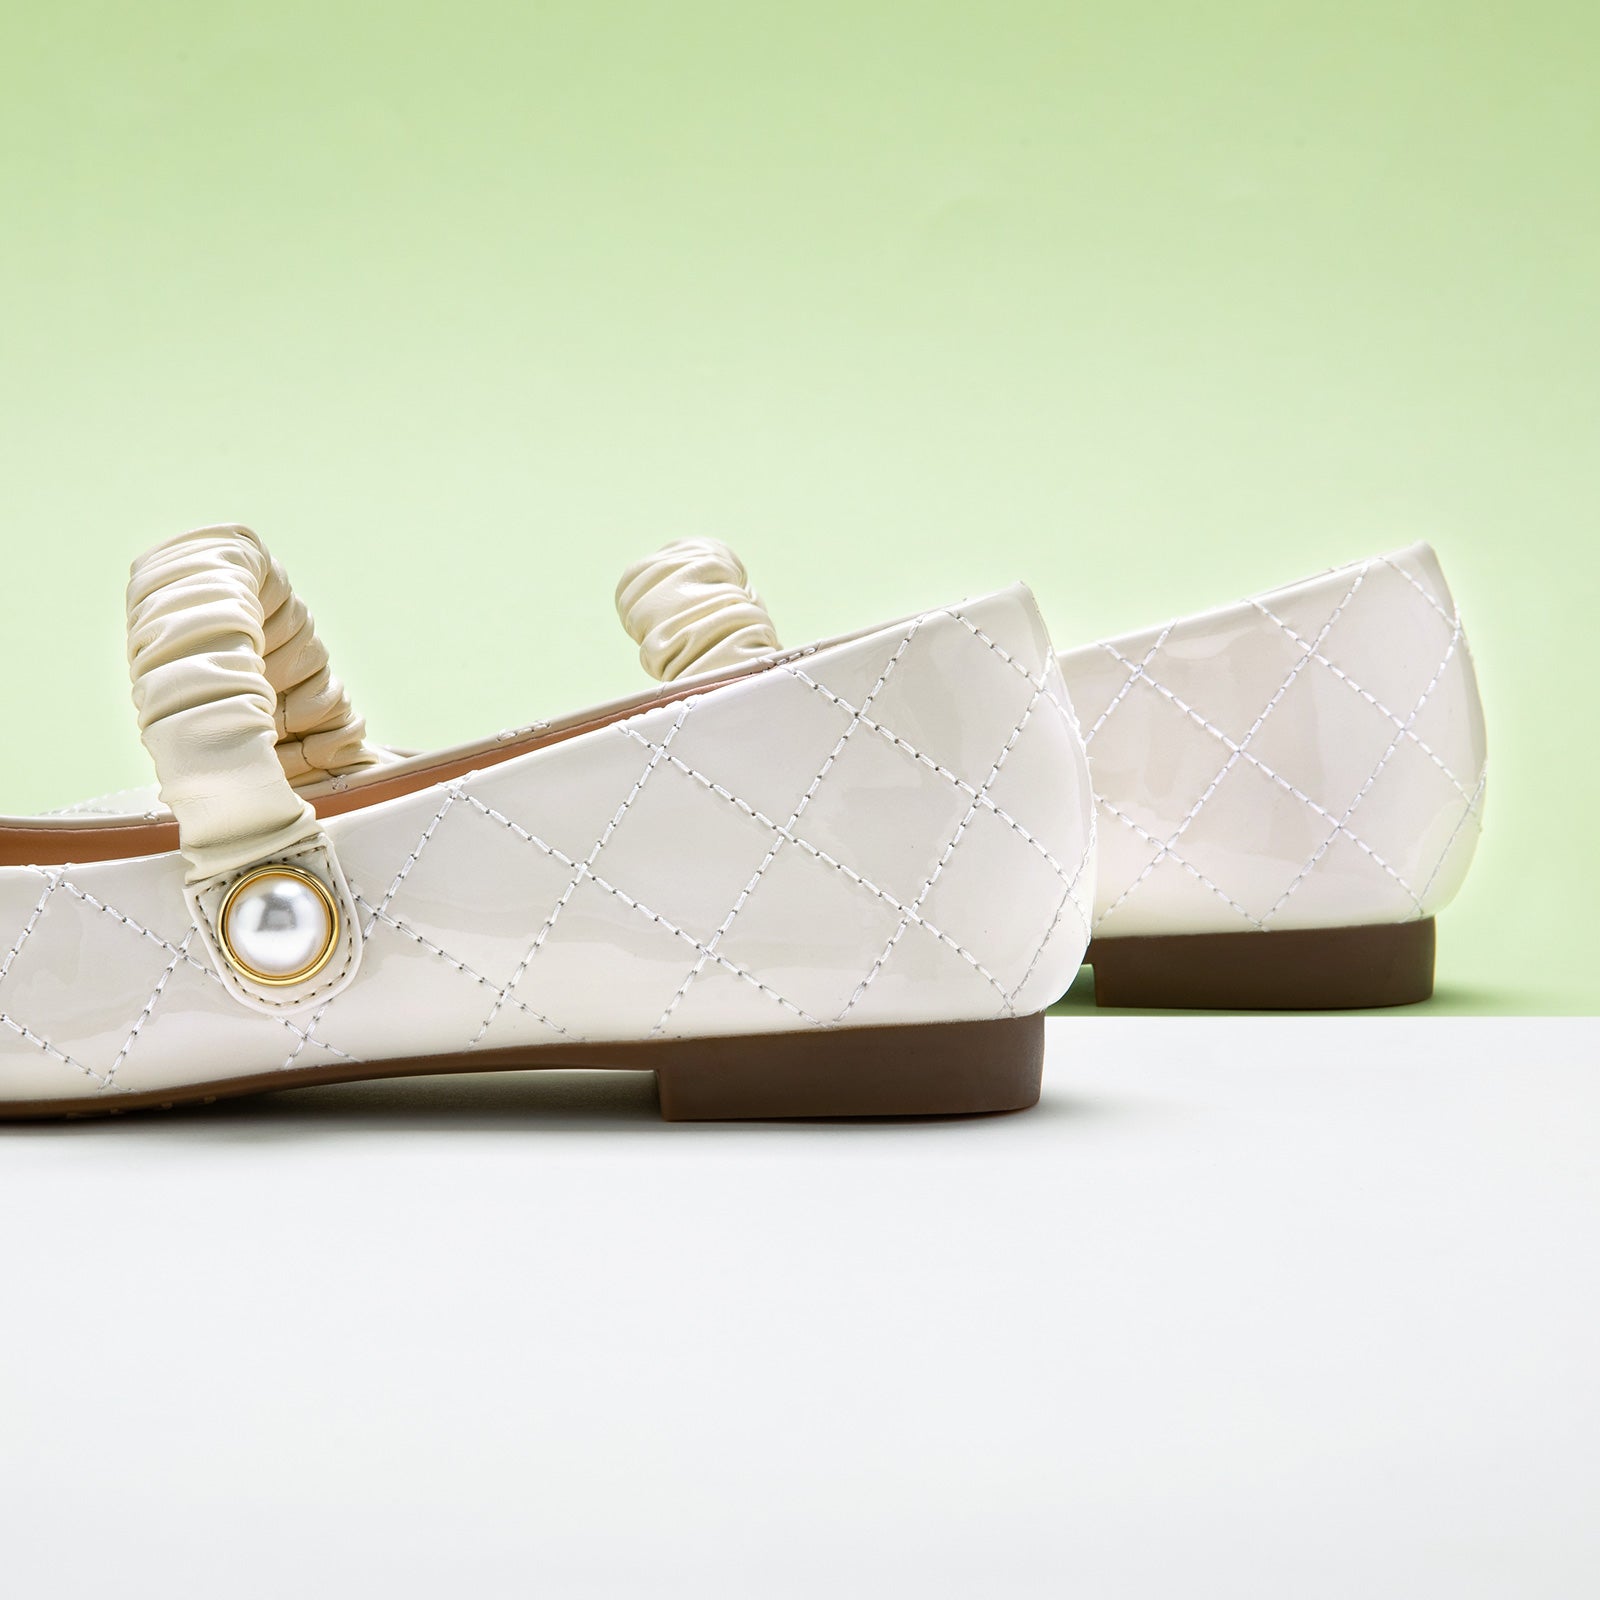  White Crossed Stripe Mary Jane shoes, providing a clean and contemporary touch to your ensemble